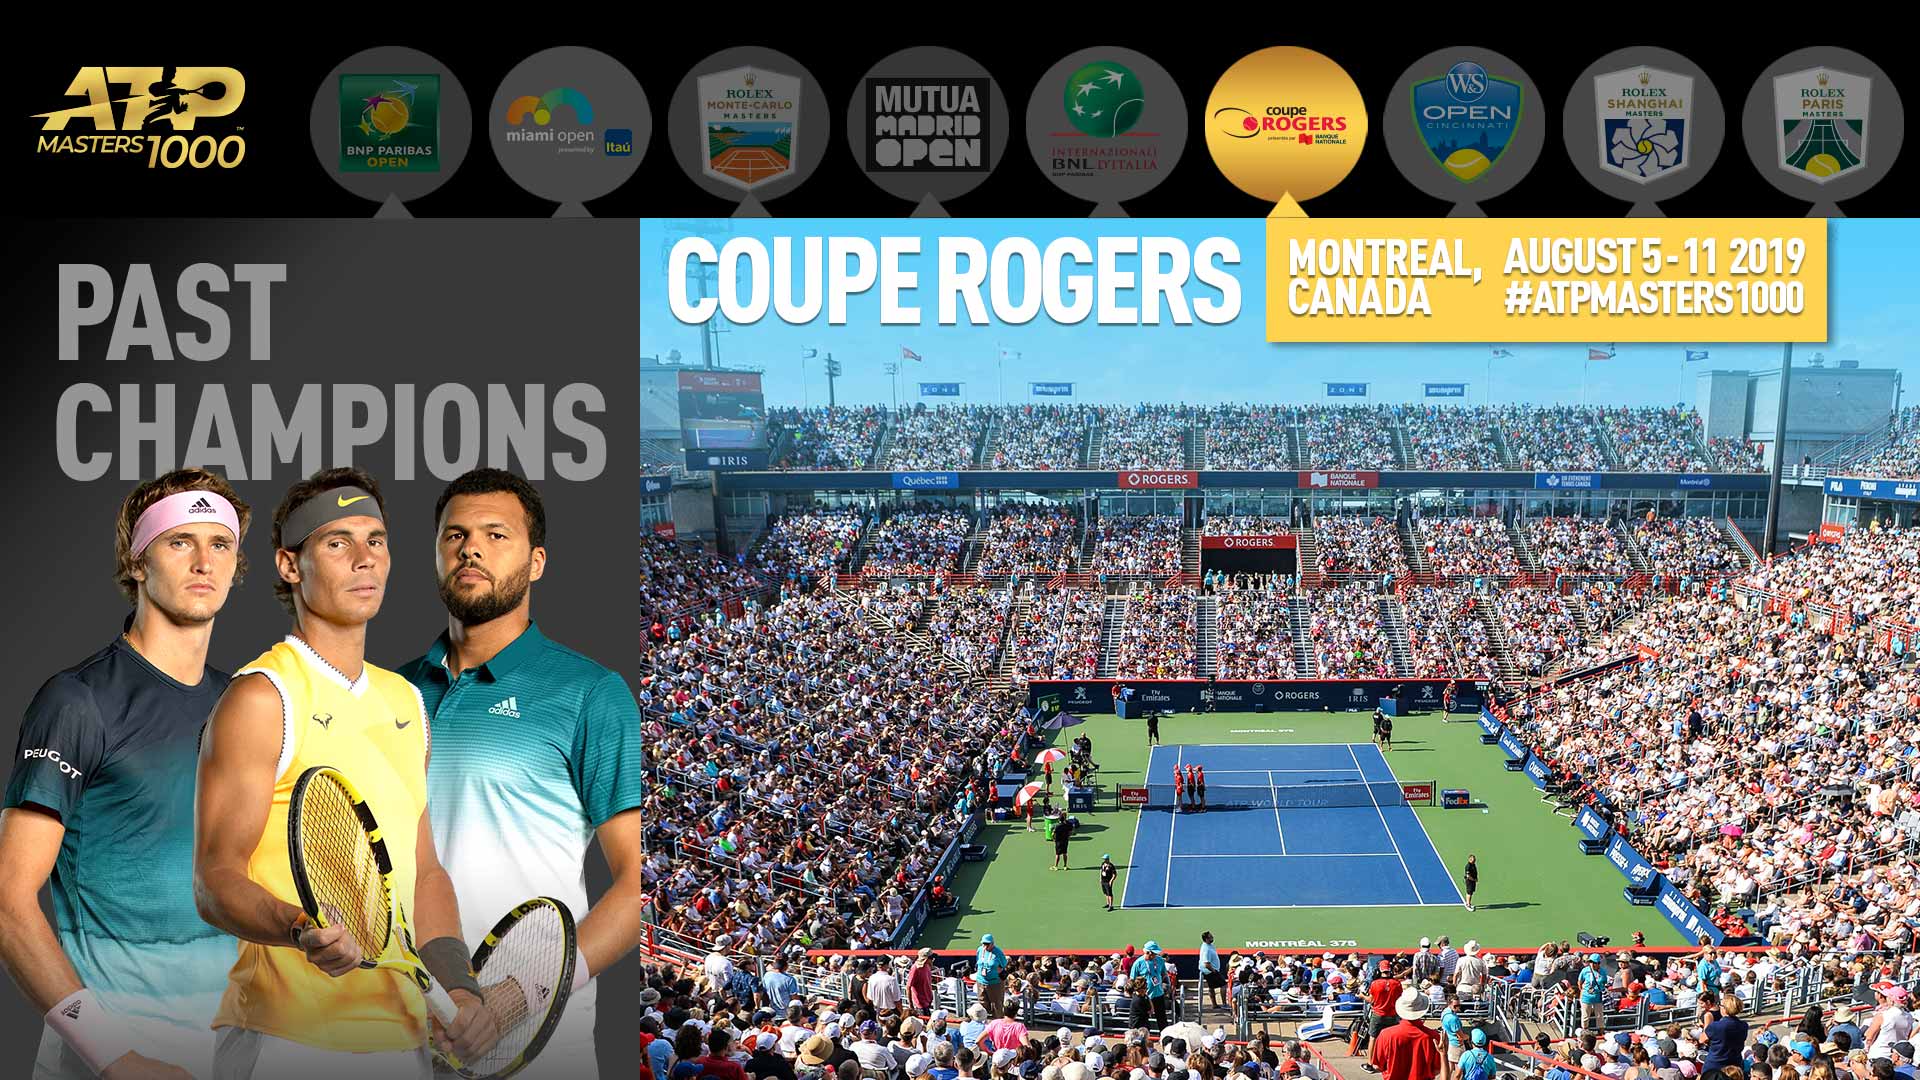 Rafael Nadal, Oldest Coupe Rogers Champion, Goes For Fifth Title In Canada; Facts and Figures ATP Tour Tennis